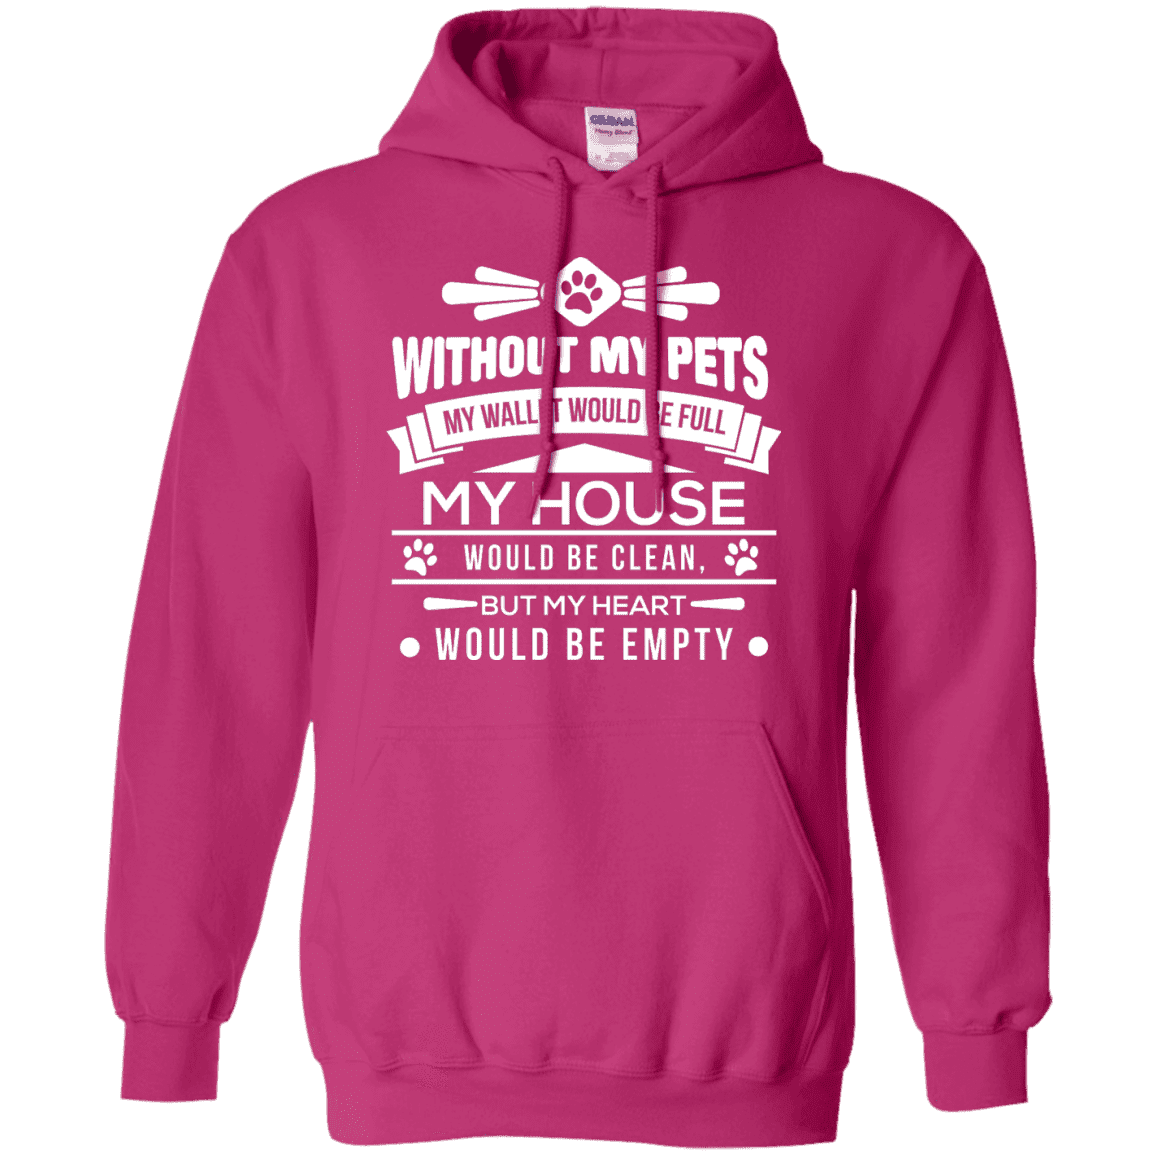 Without My Pets - Hoodie.